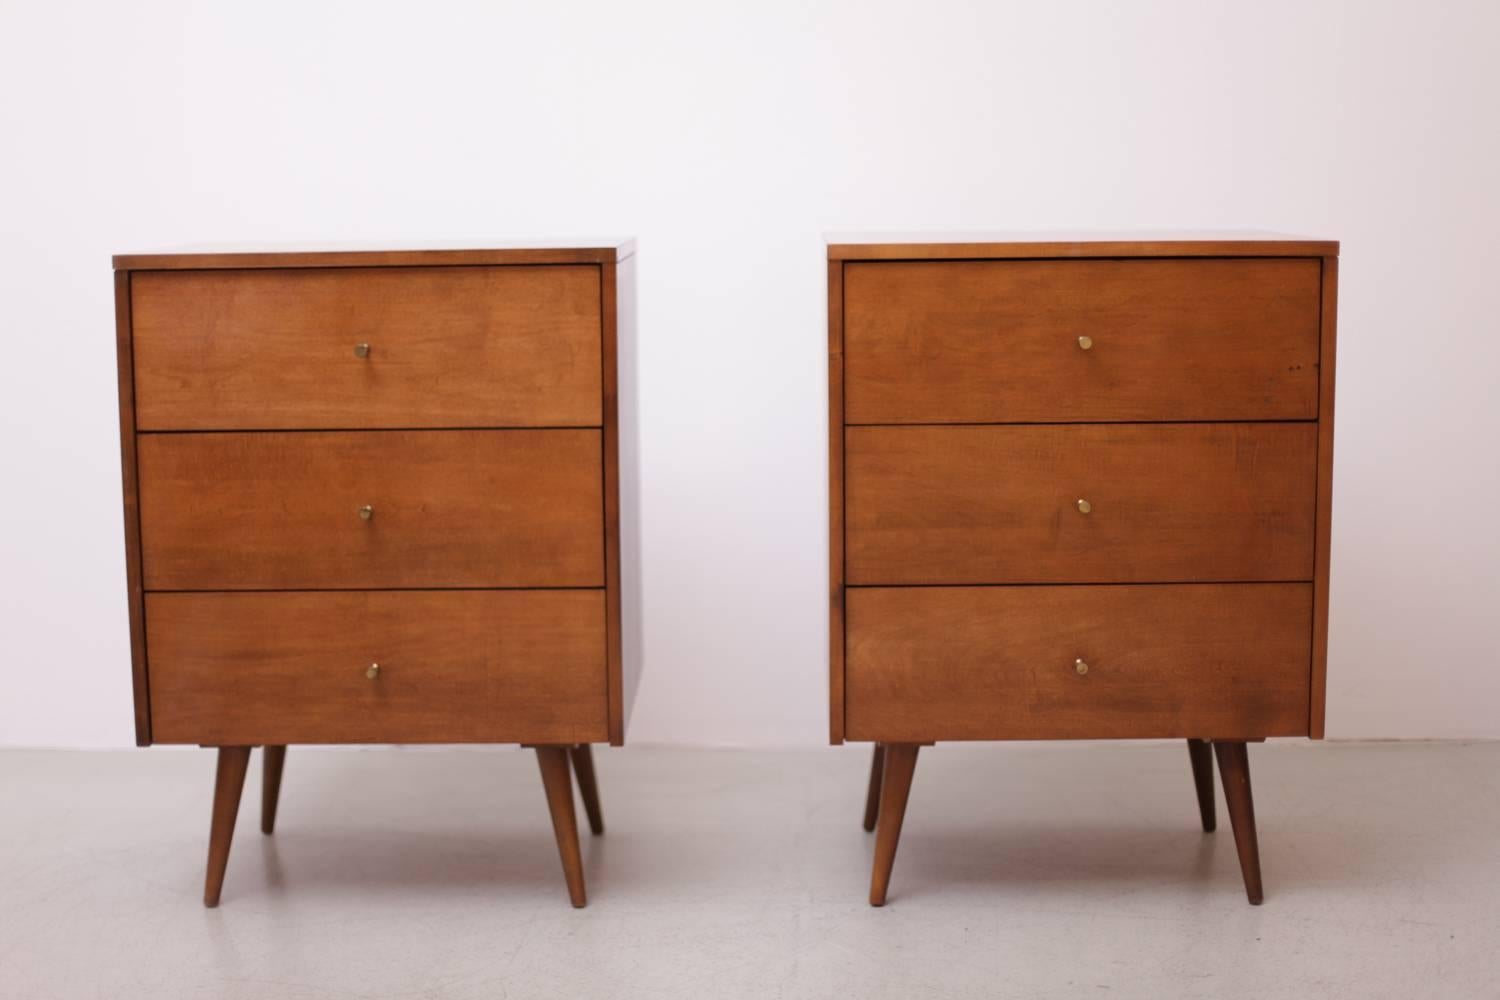 Set of two beautiful chest of drawers by Paul McCobb for Winchendon in dark maple. 
Good vintage condition with some marks of use.